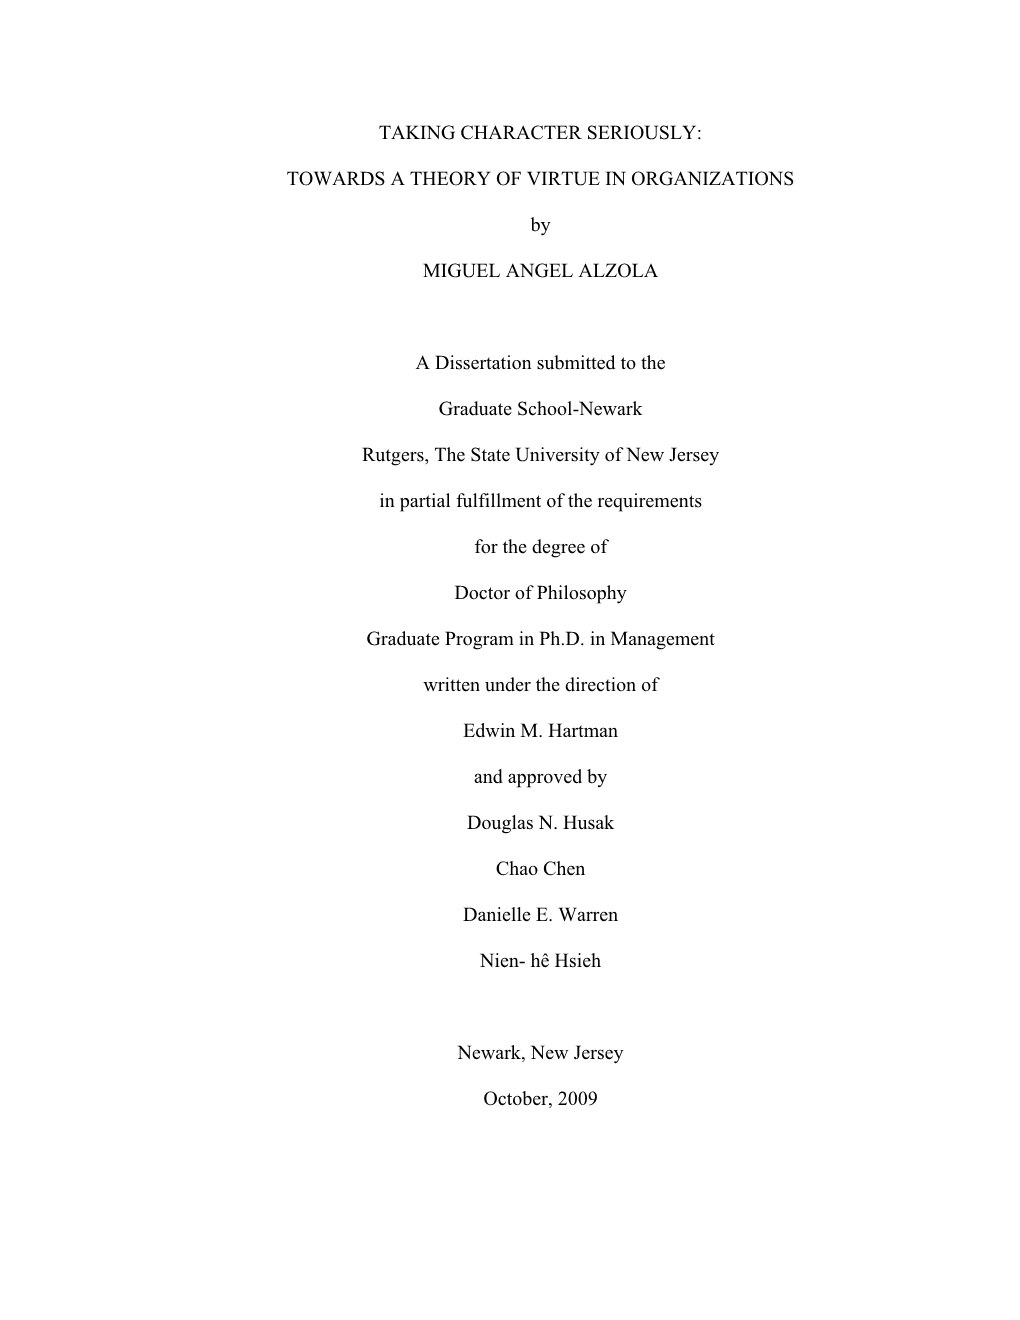 TAKING CHARACTER SERIOUSLY: TOWARDS a THEORY of VIRTUE in ORGANIZATIONS by MIGUEL ANGEL ALZOLA a Dissertation Submitted to the G